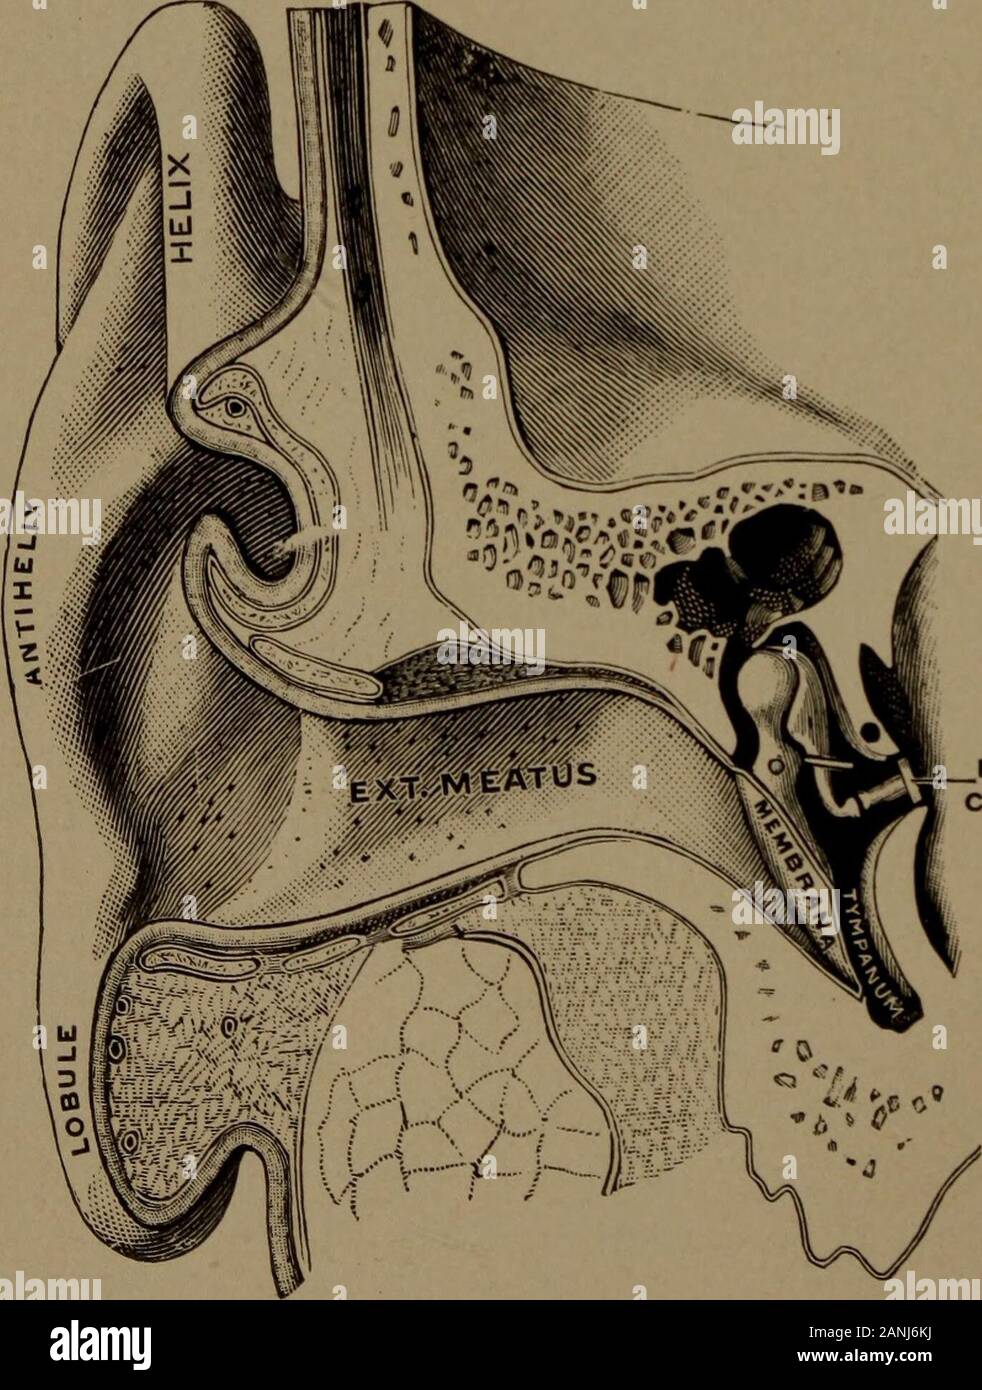 A manual of otology for students and practitioners . Int. carat, a Membrana  / • tympani / Cartilage of the cxt.ouditory meatus Fig. 2.—Horizontal  section of the external auditory meatus and tym-panum. (